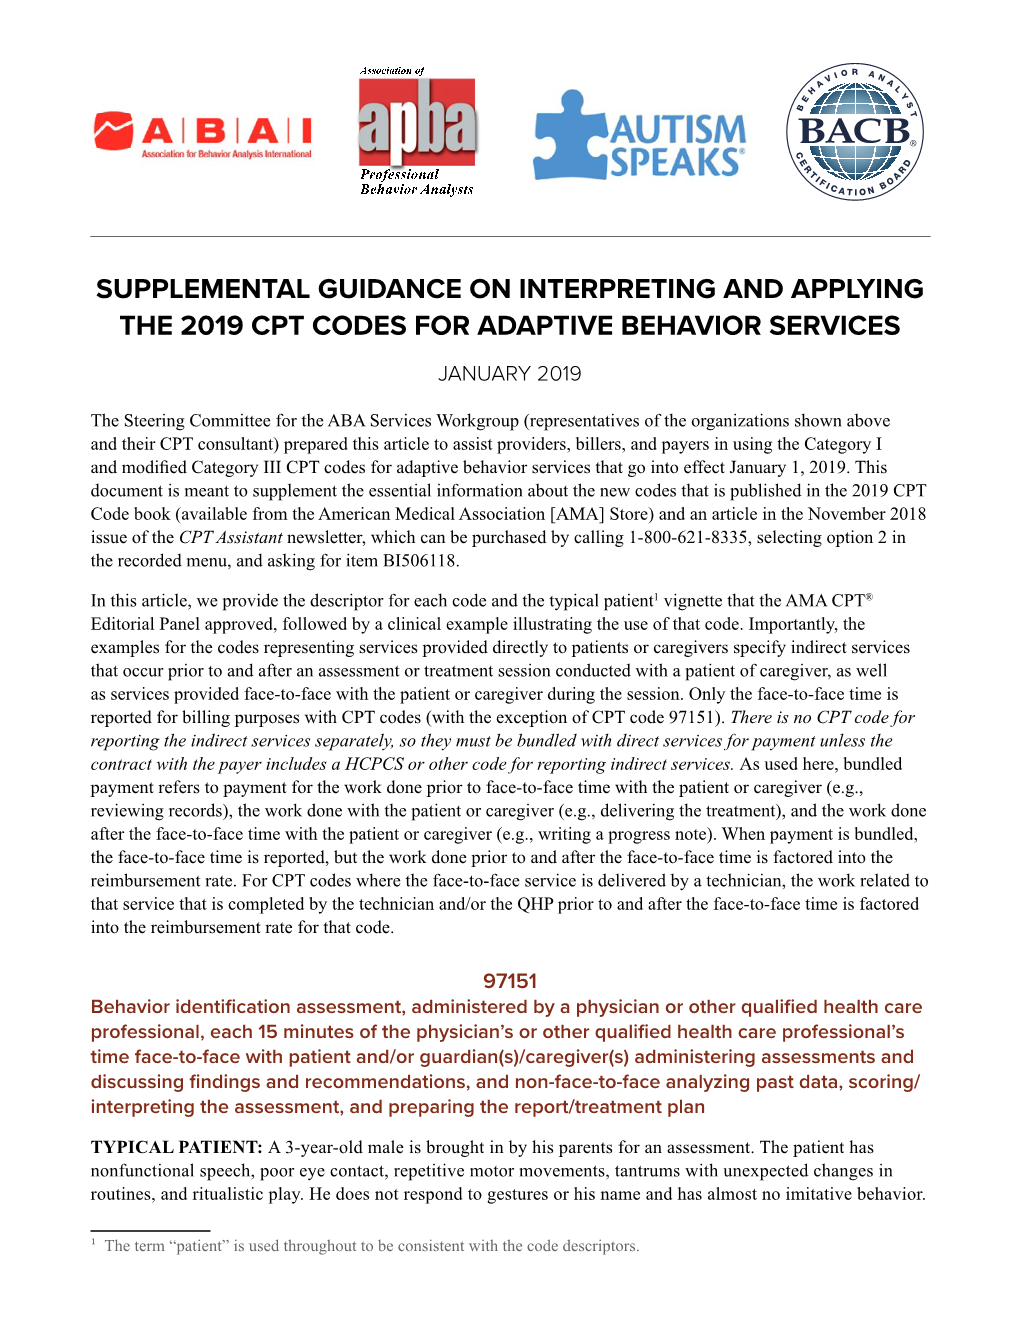 Interpreting and Applying the 2019 Cpt Codes for Adaptive Behavior Services January 2019